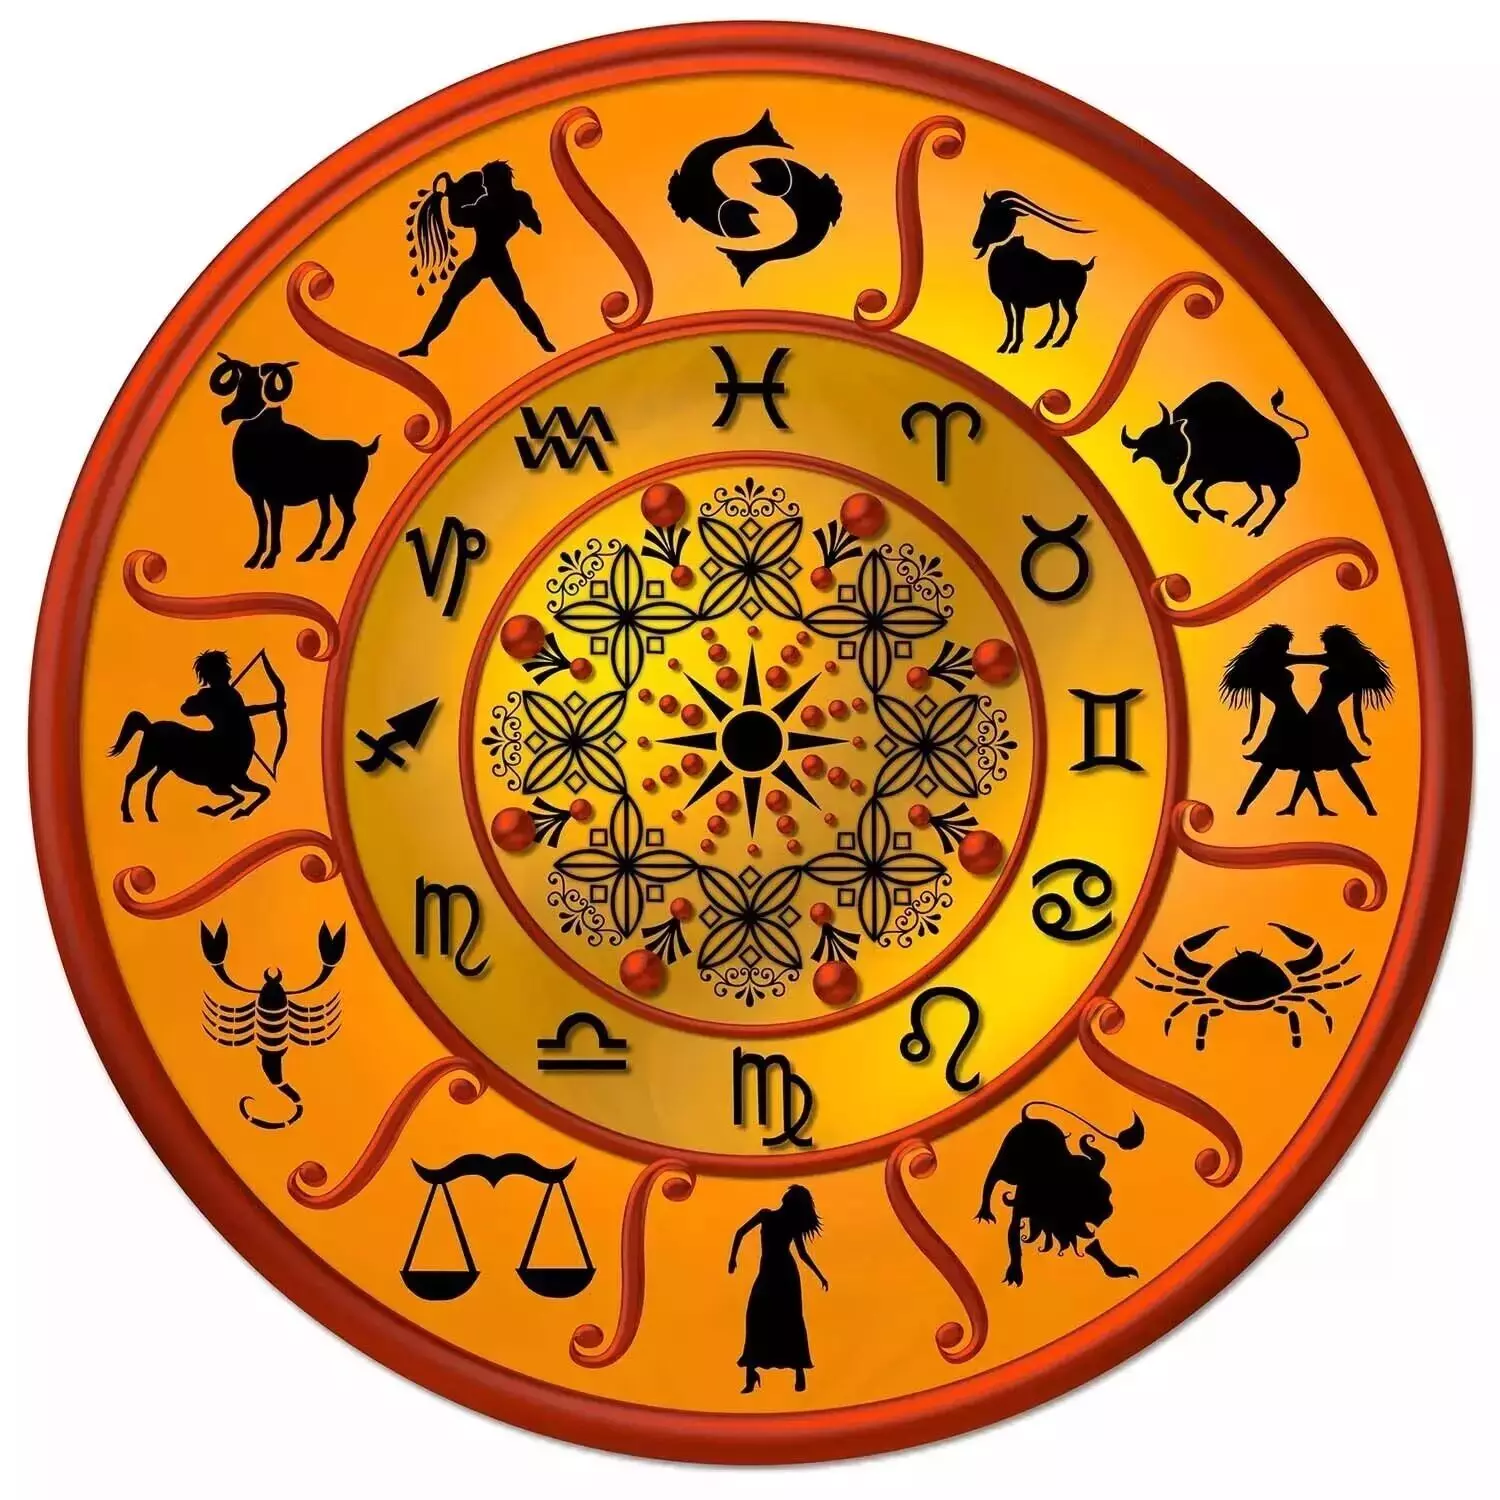 13 March – Know your todays horoscope